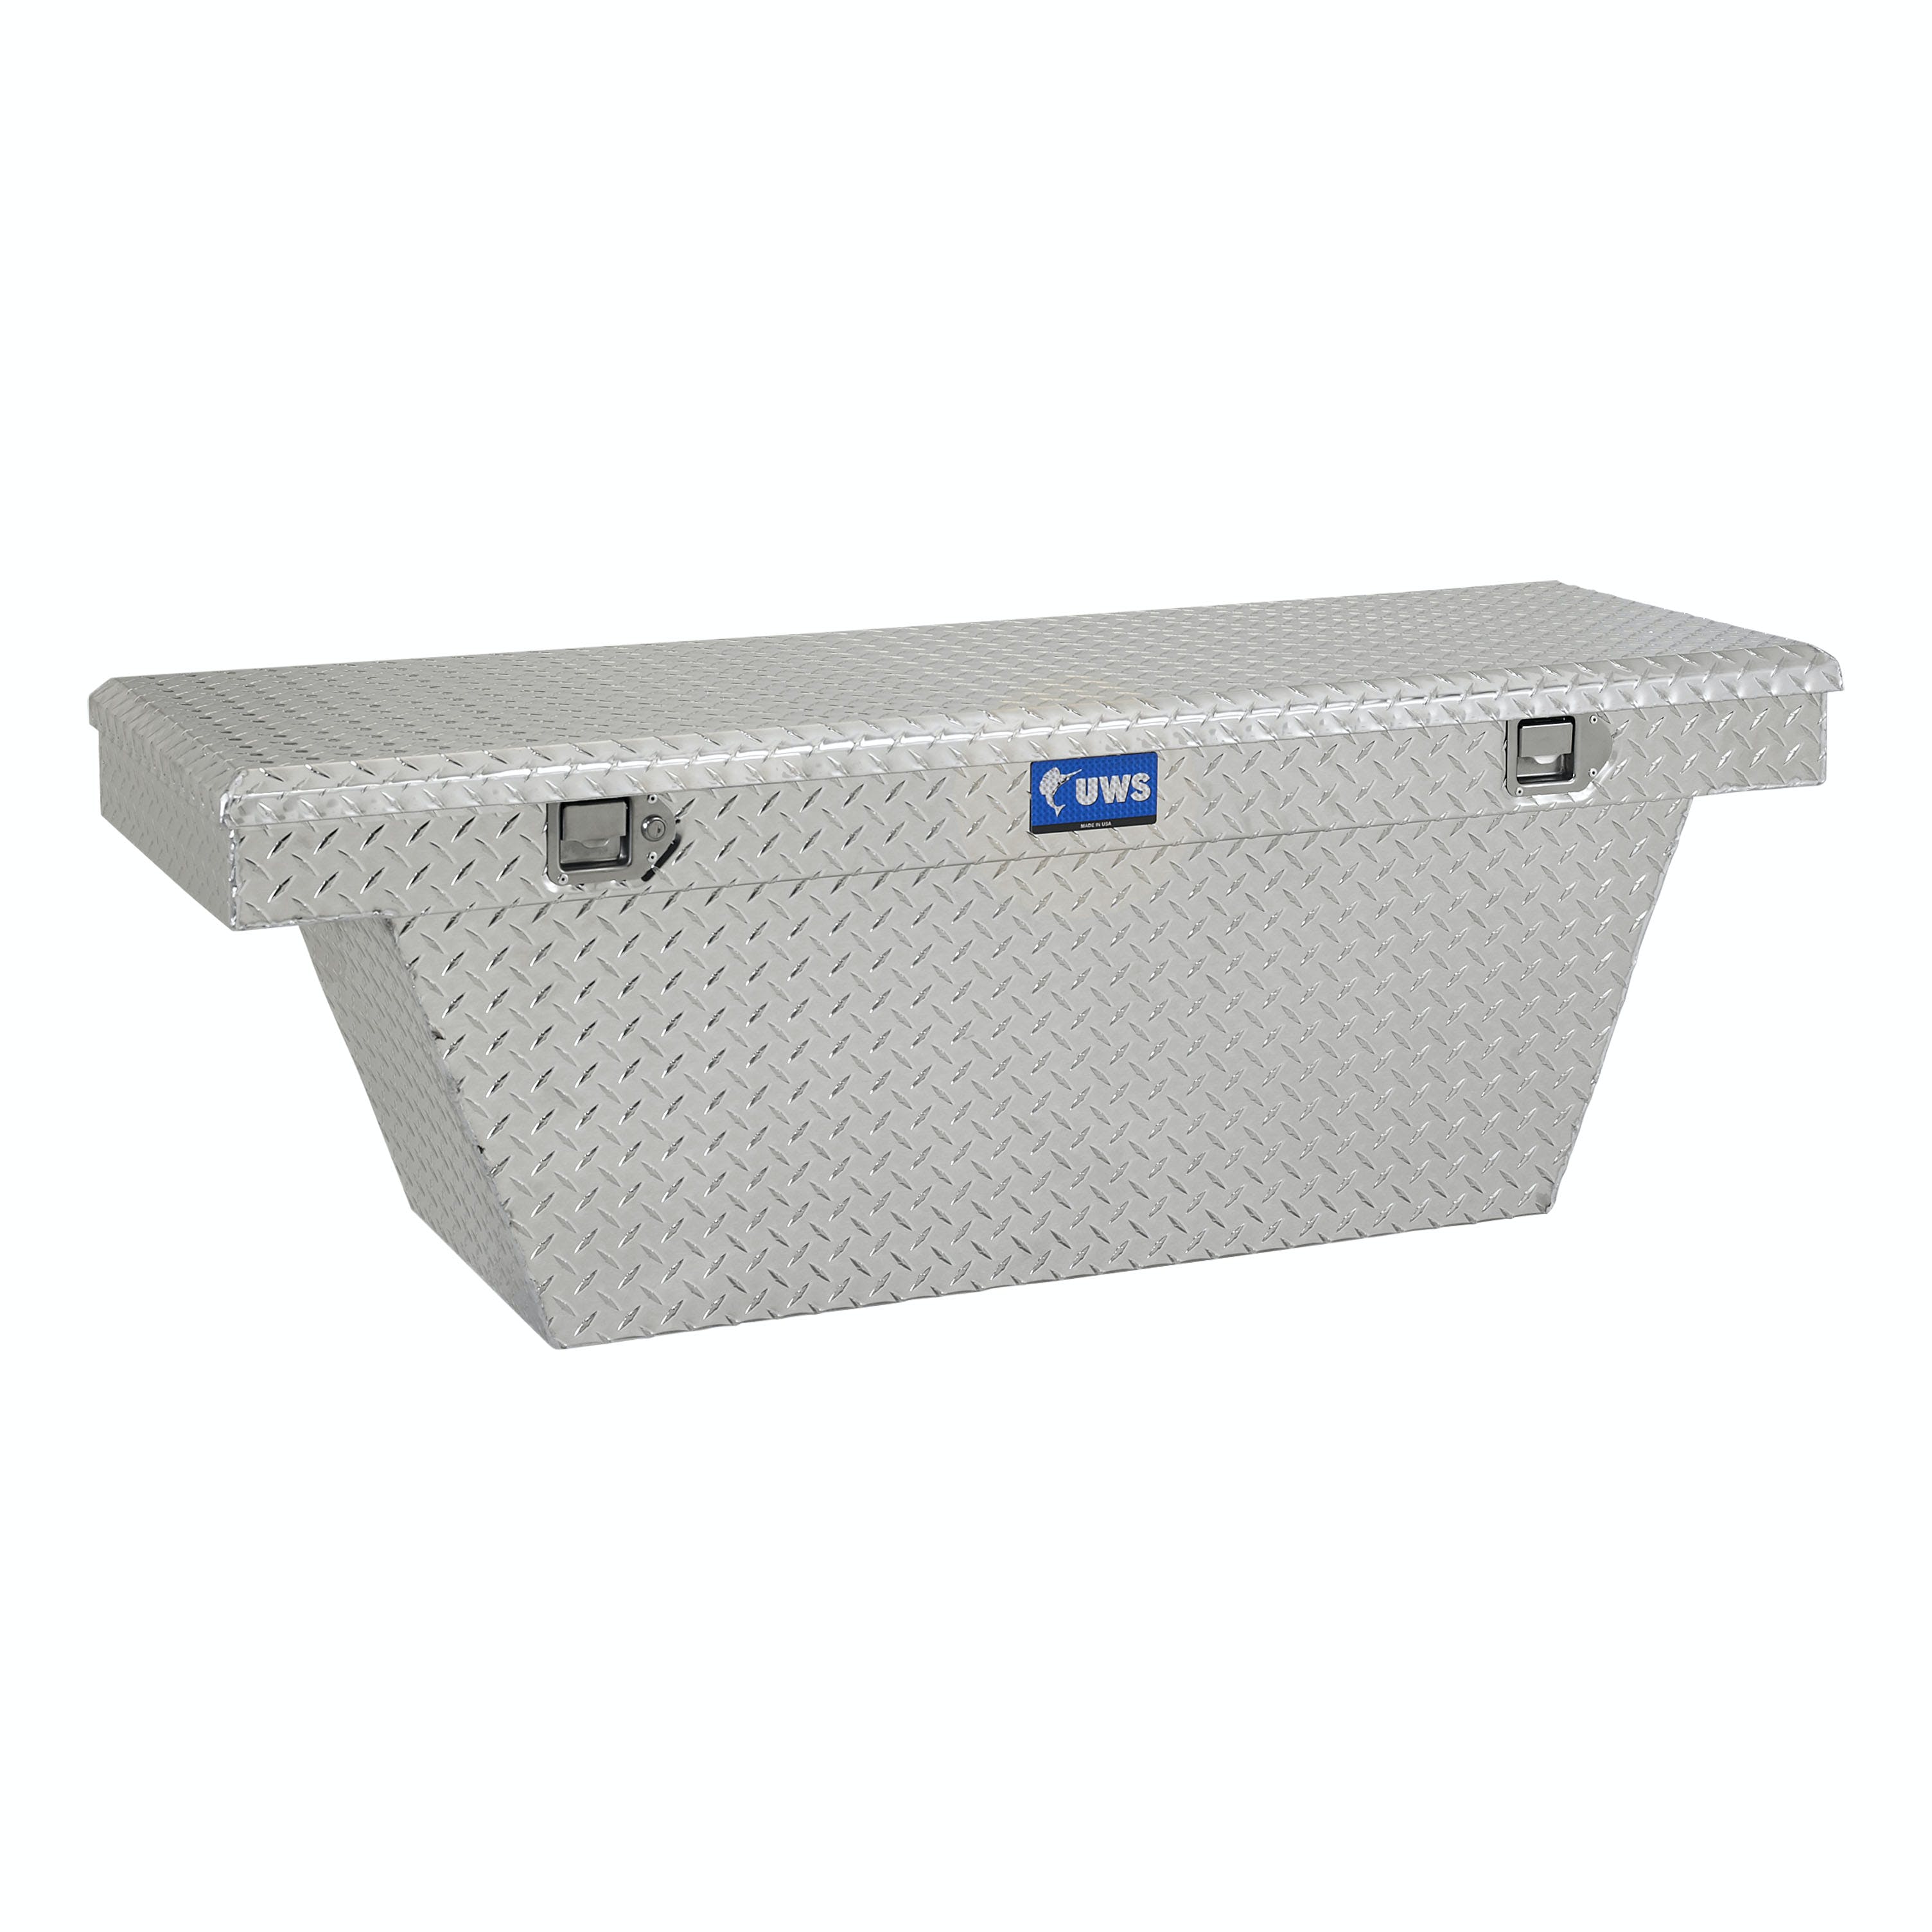 UWS TBSD-63A 63 inch Aluminum Single Lid Crossover Toolbox Deep Angled